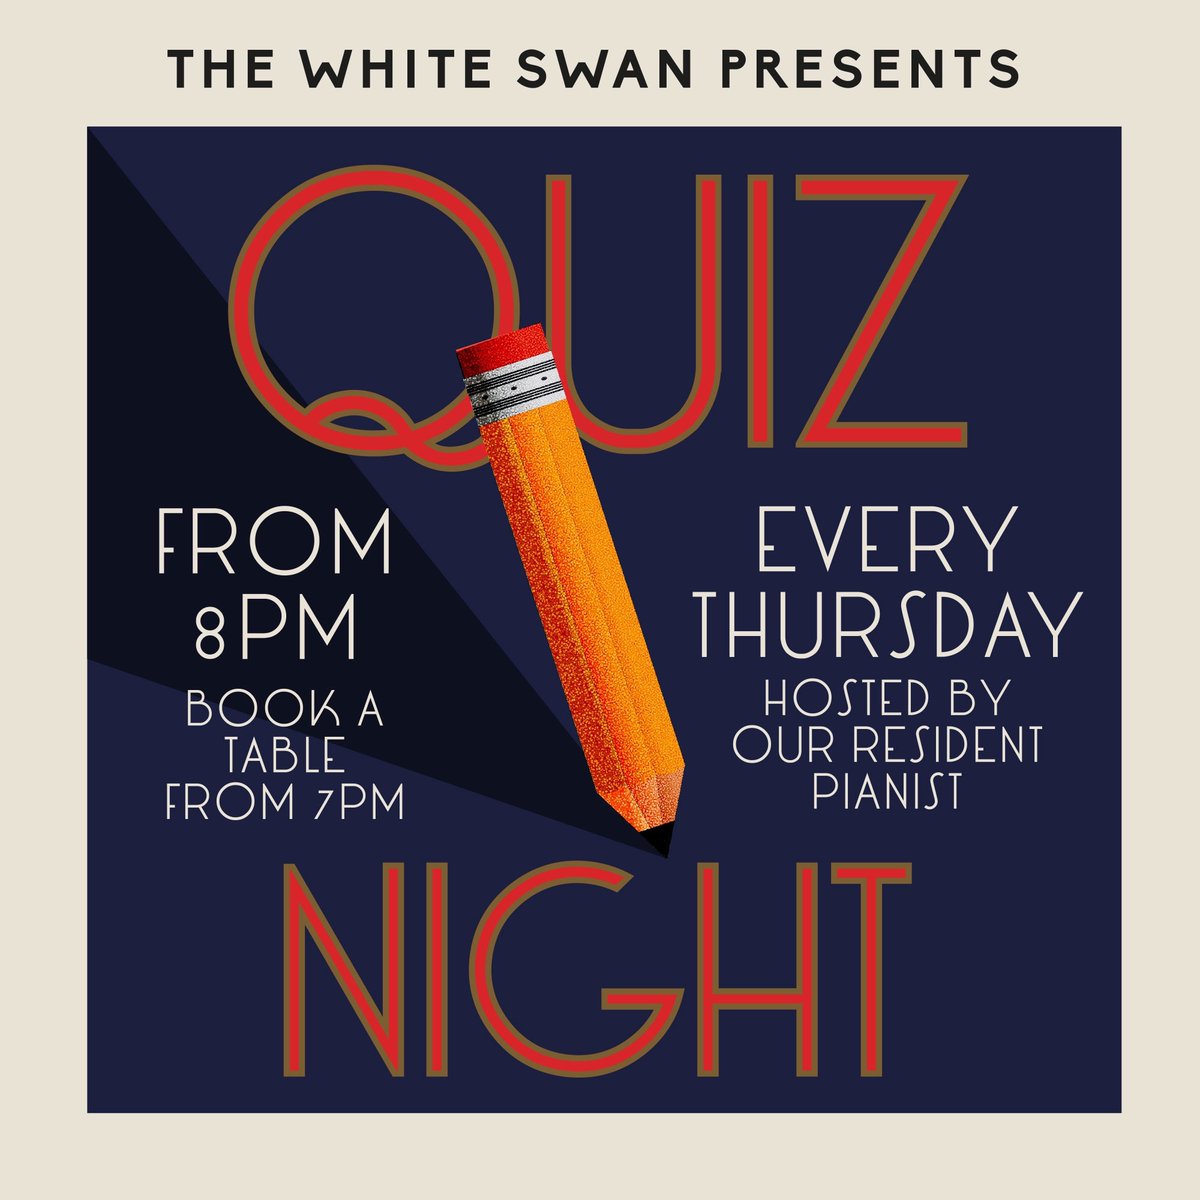 📝🚨 IT’S QUIZ NIGHT 🚨🍻 If you fancy tour chances at winning a gallon of Beer join Jacob on Piano tonight for our Weekly Quiz for an 8pm start! We only have a few tables left so book online now through the link in our Bio!